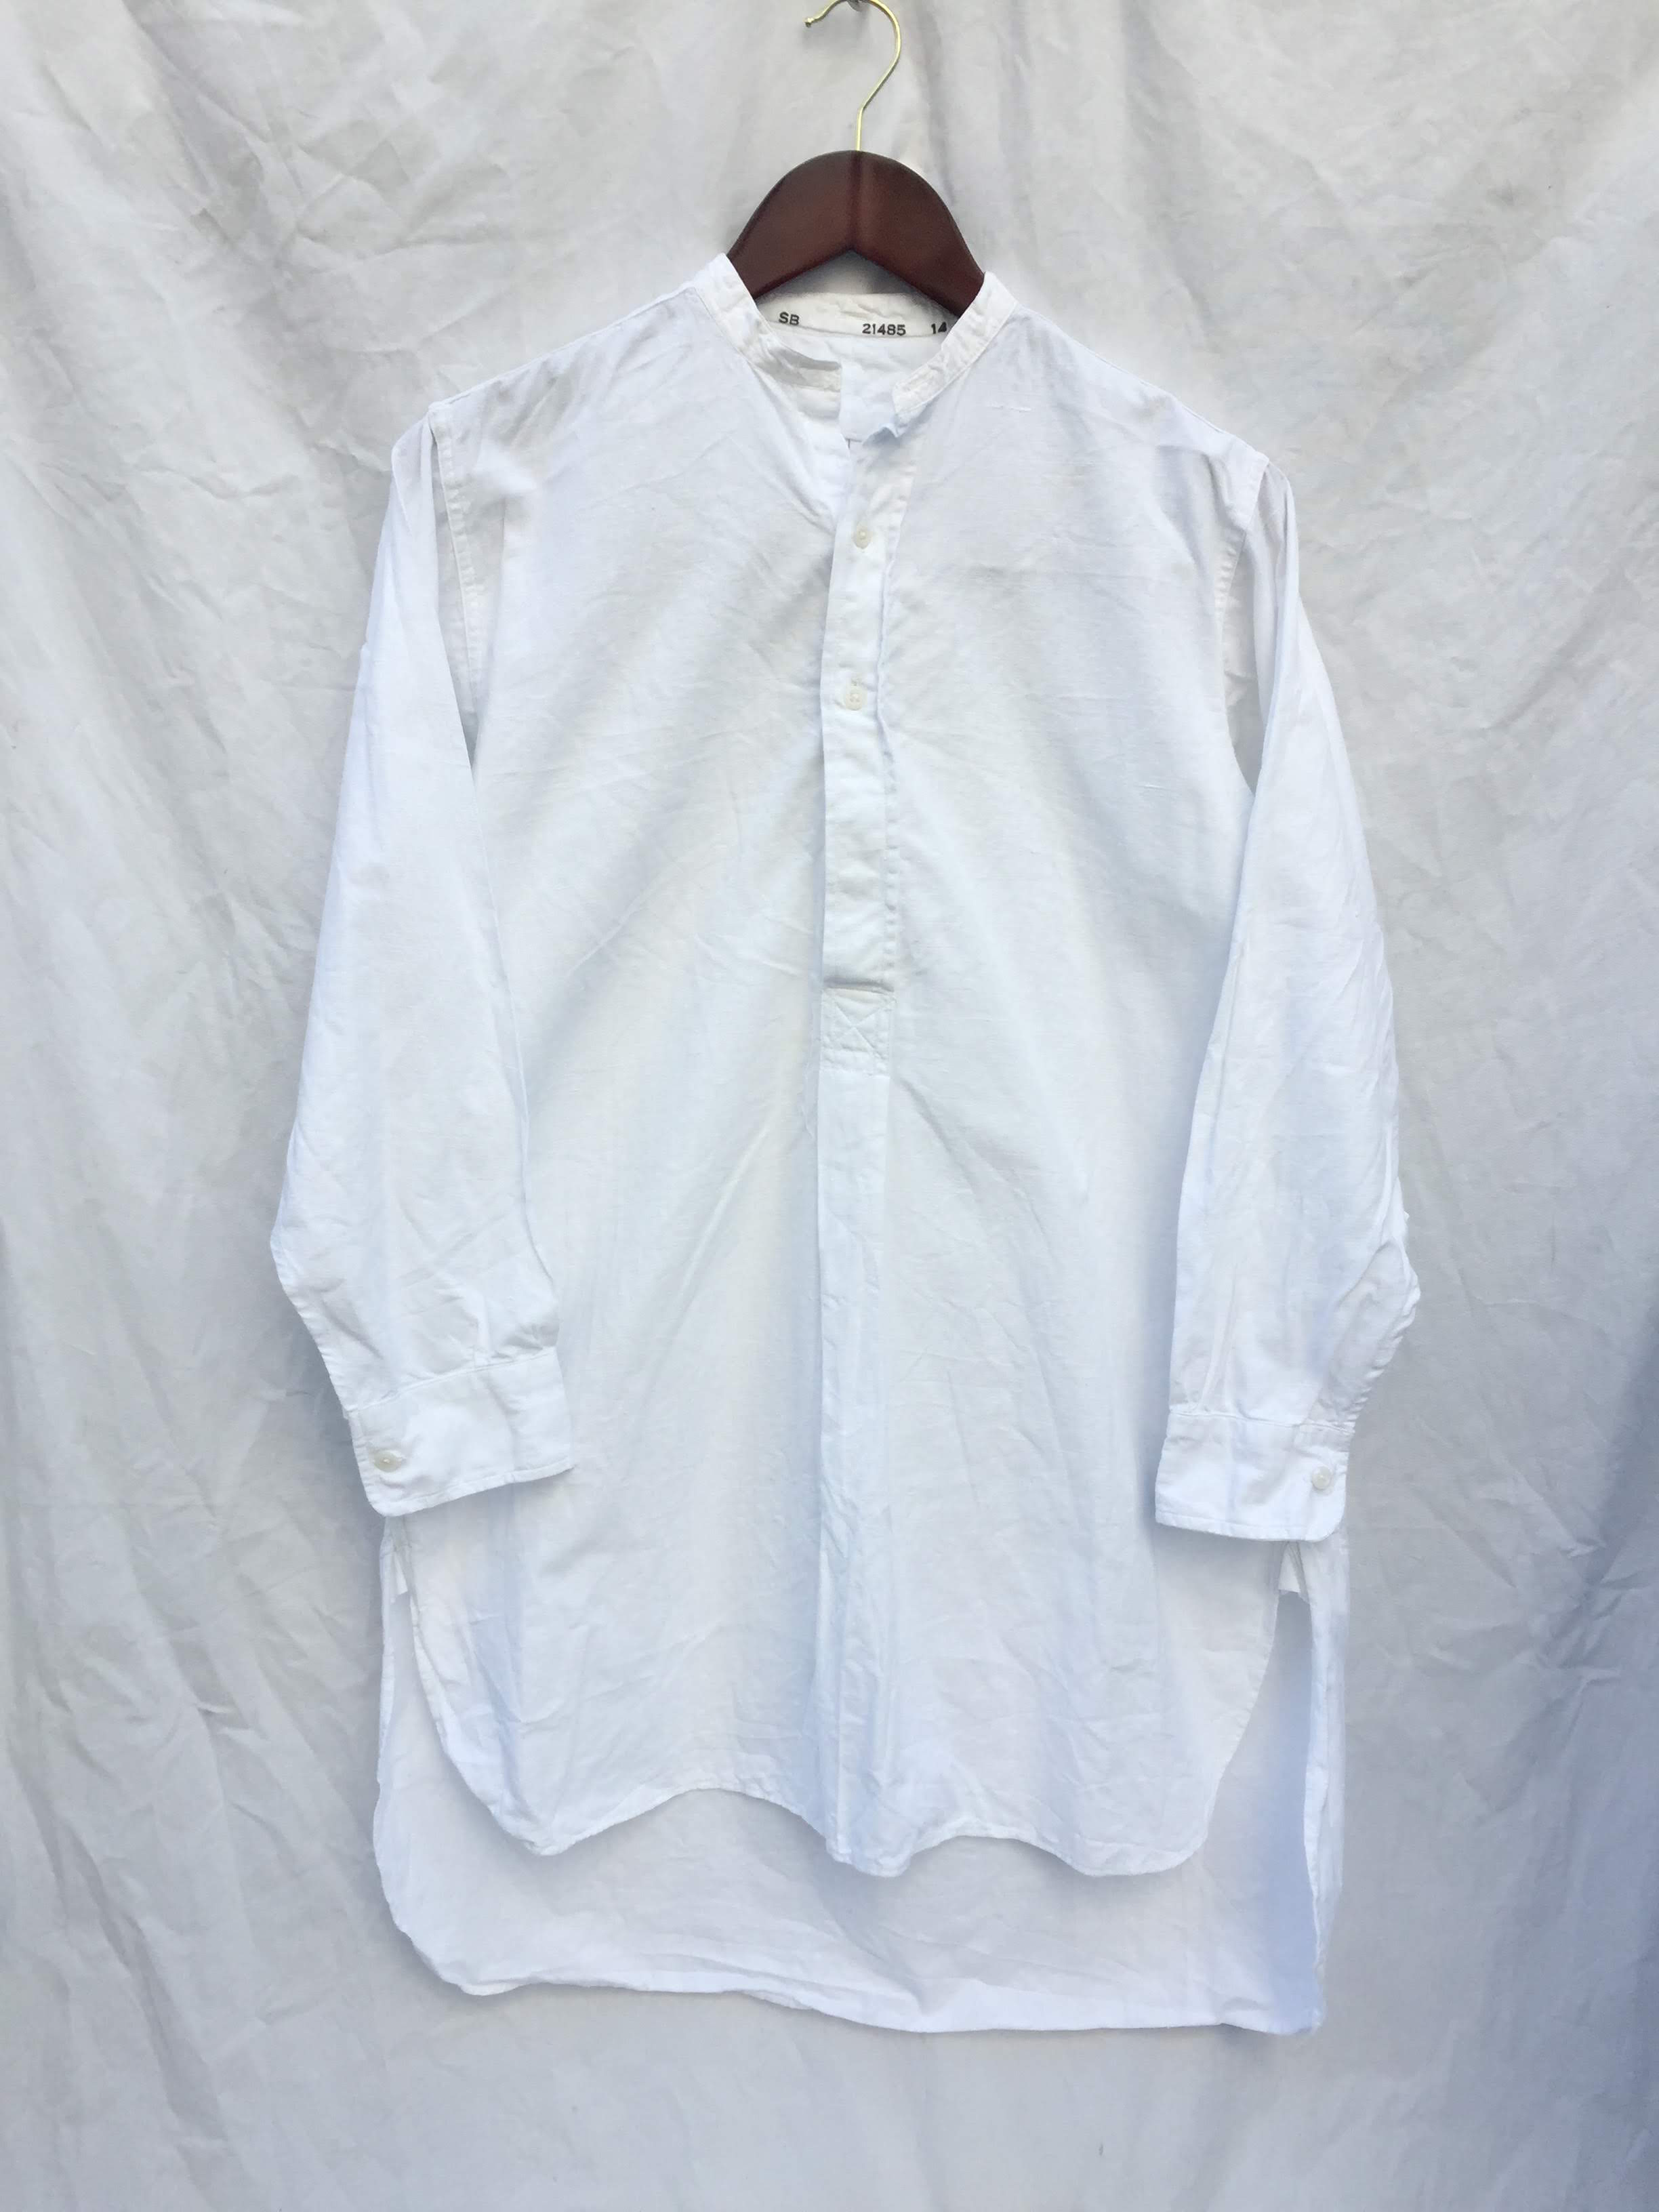 50's Vintage Dead Stock Royal Navy Officer Pullover Shirts